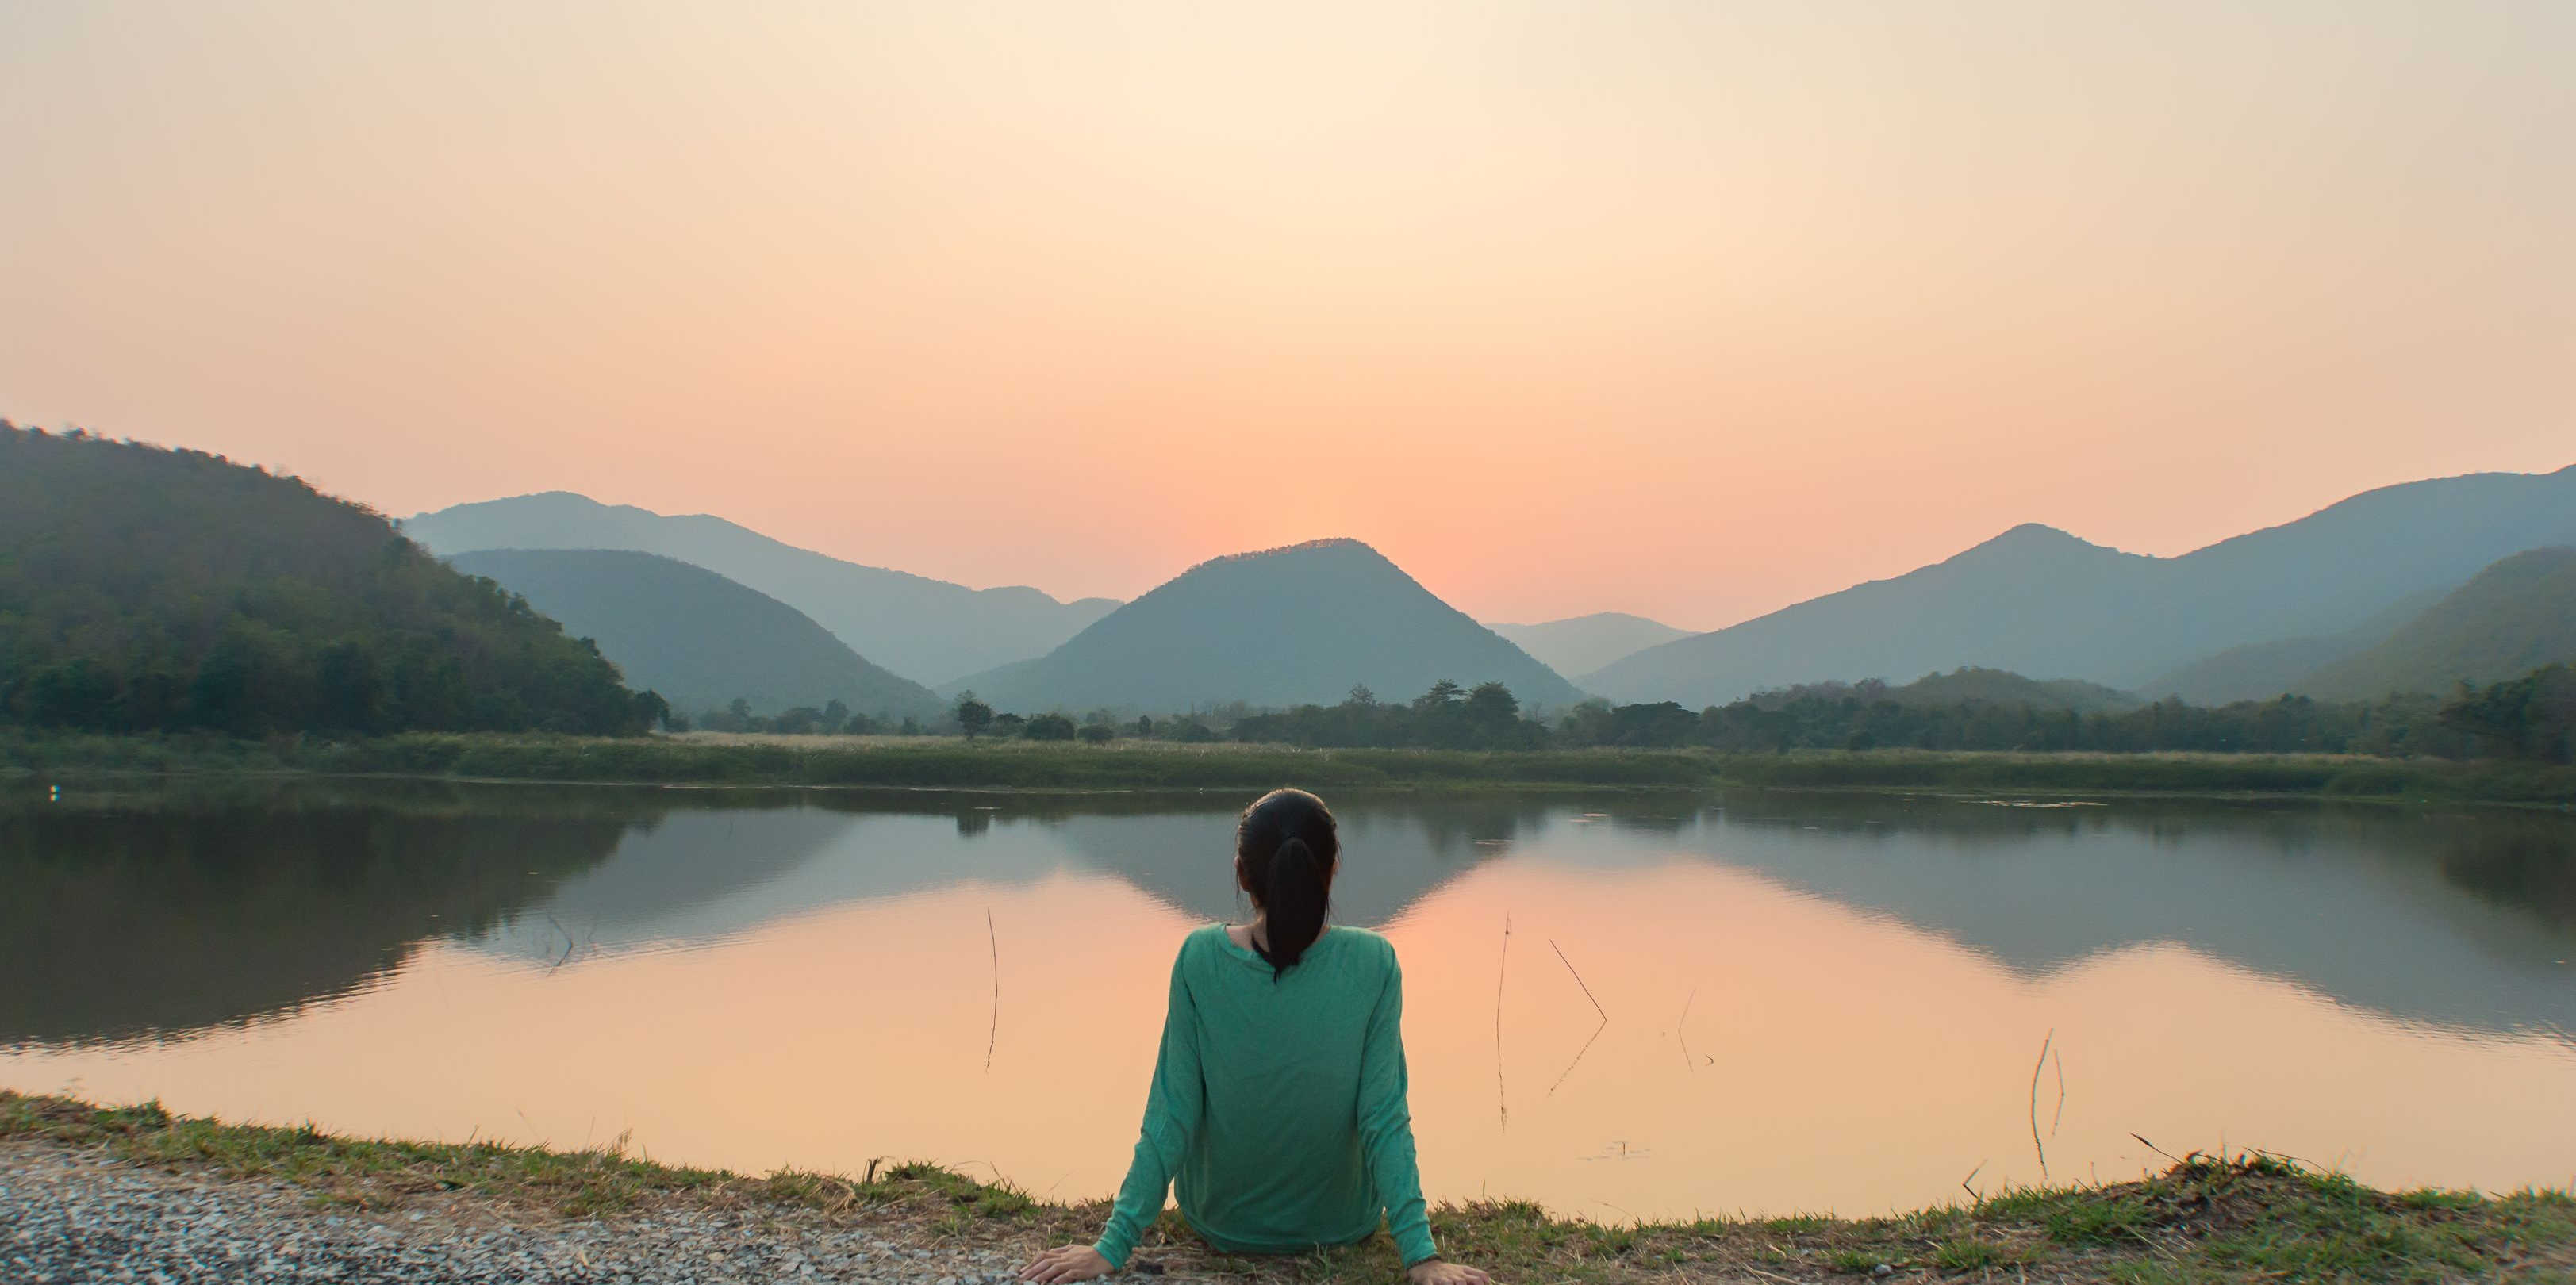 Woman looking looking at a sunset over a still lake with mountains in the background